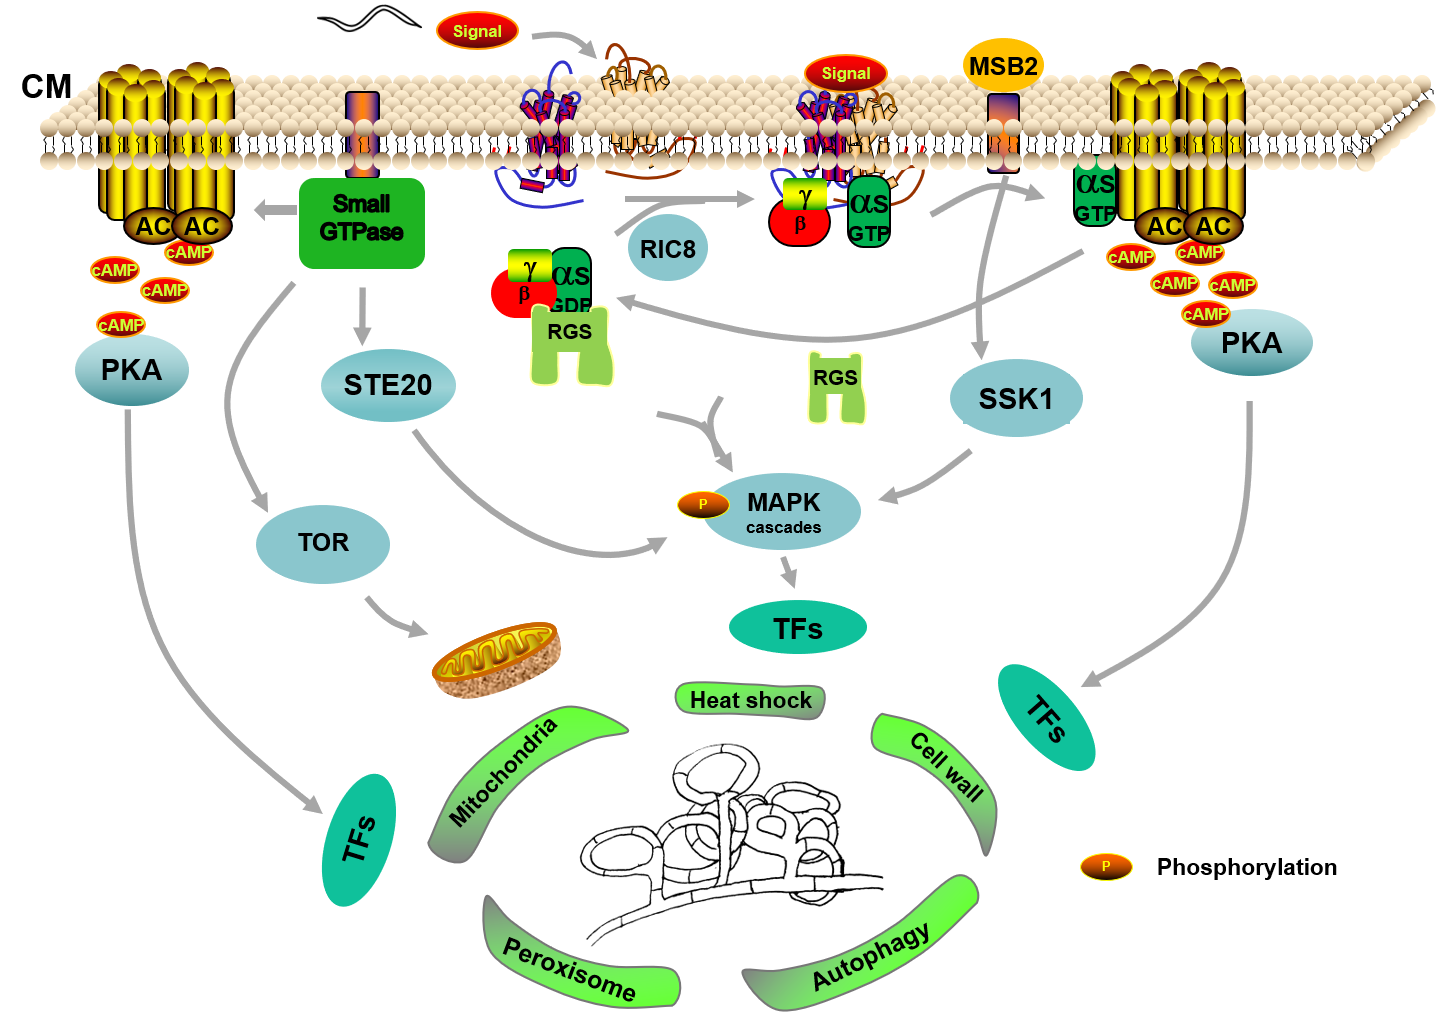 Figure 1. A proposed model for trap formation in NT fungi using A. oligospora as an example. CM, cell membrane; α, β, and γ, G-protein subunits; AC, adenylate cyclase; cAMP, cyclic adenosine monophosphate; PKA, protein kinase A; RGSs, regulators of G-protein signaling; RIC8, resistance to inhibitors of cholinesterase; MAPK, mitogen-activated protein kinase; STE20, serine/threonine protein kinase; TOR, mammalian target of rapamycin; MSB2, mucin family signaling protein; SSK1, response regulator; TFs, transcription factors; P, phosphorylation.